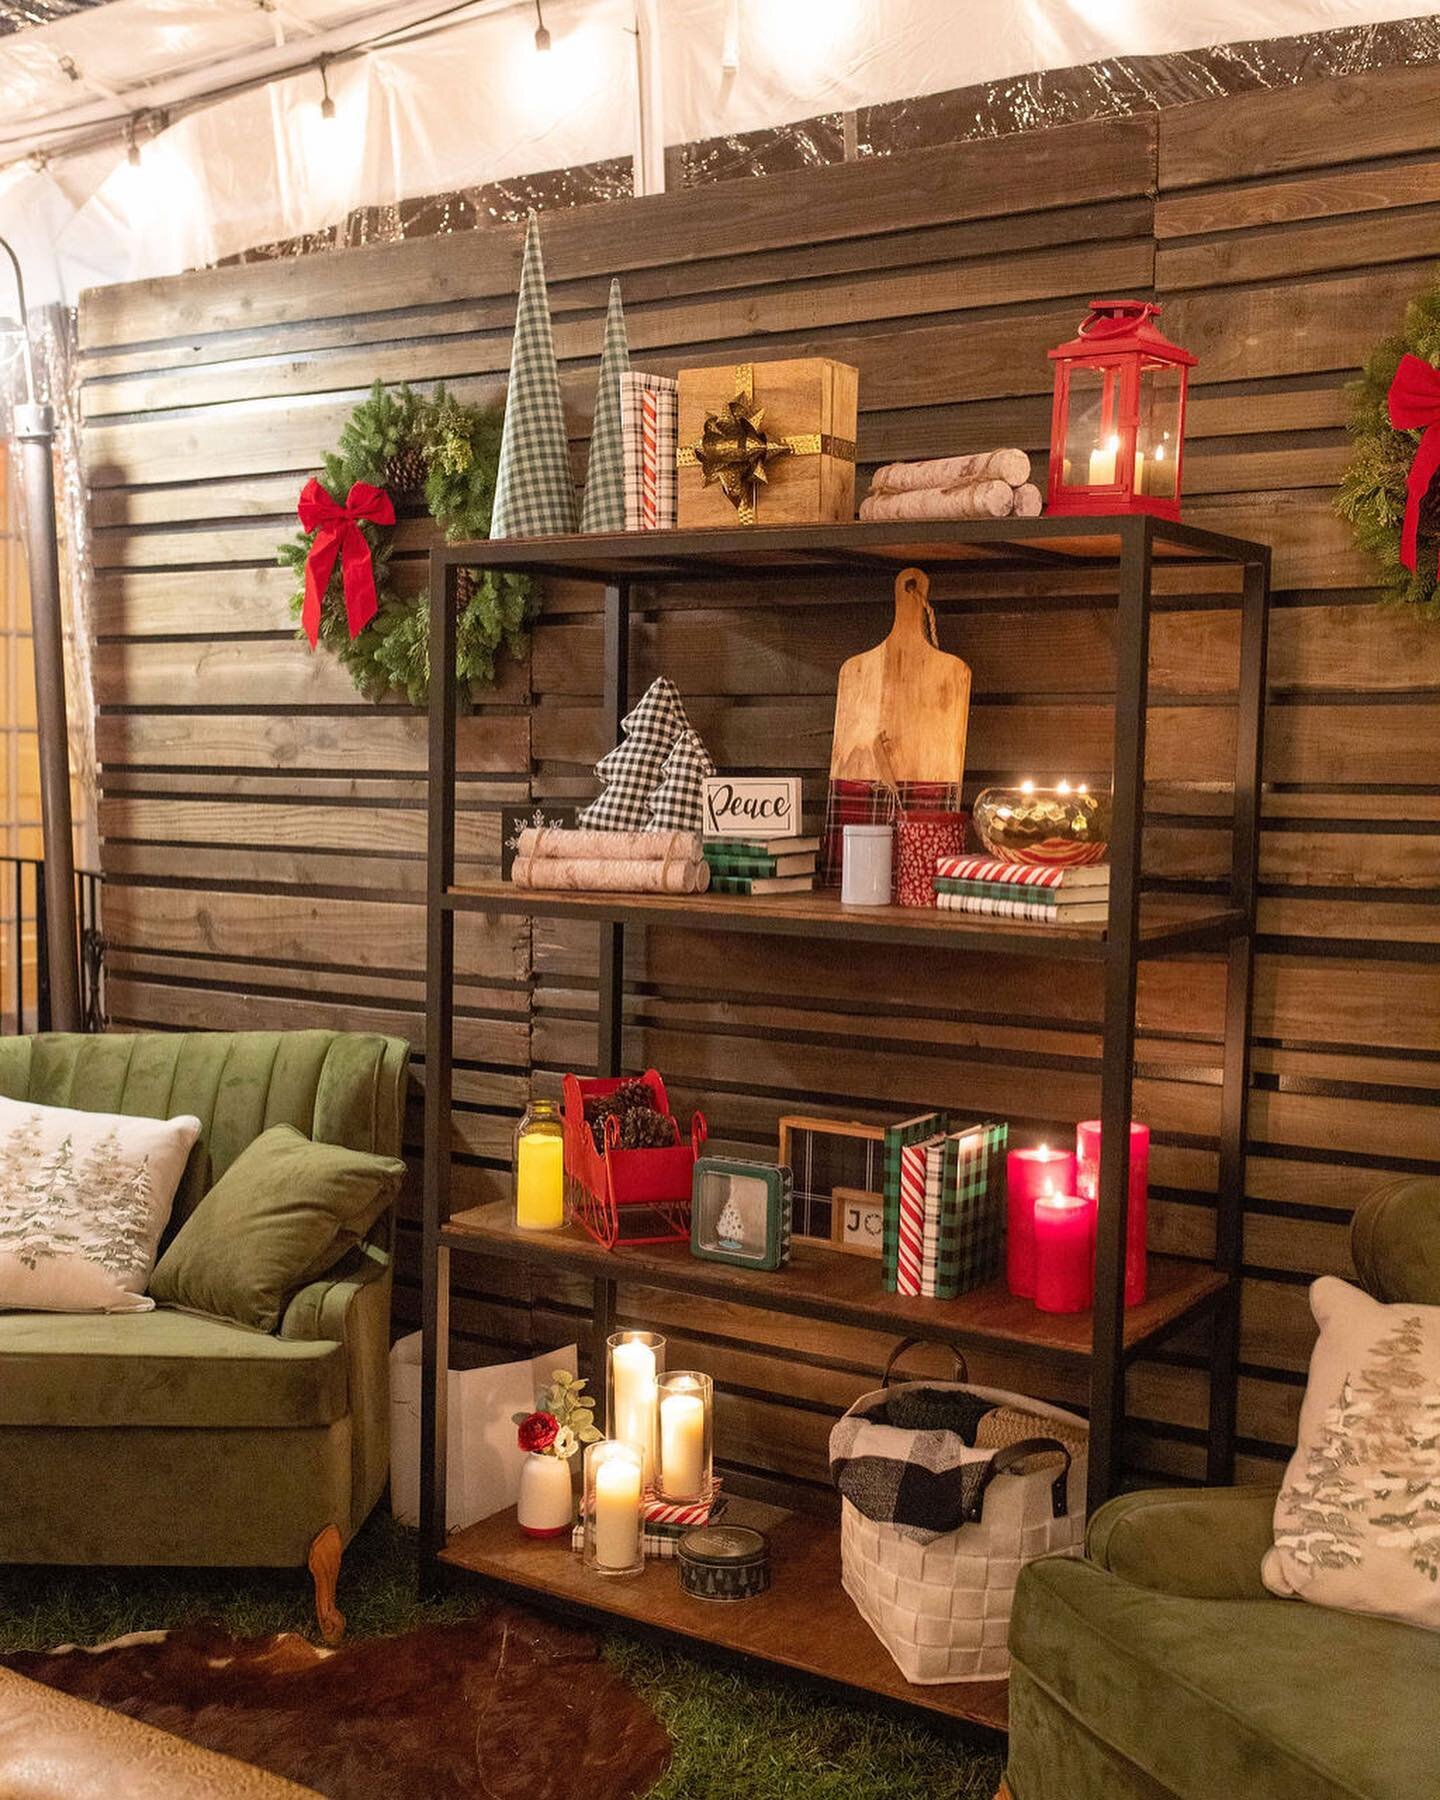 We believe details are what sets us apart and what makes a party special ✨🎄

Here we have a few detail shots of the holiday party we did on Friday where we transformed a backyard into a cozy lodge where guests enjoyed dinner, drinks, music, games, &